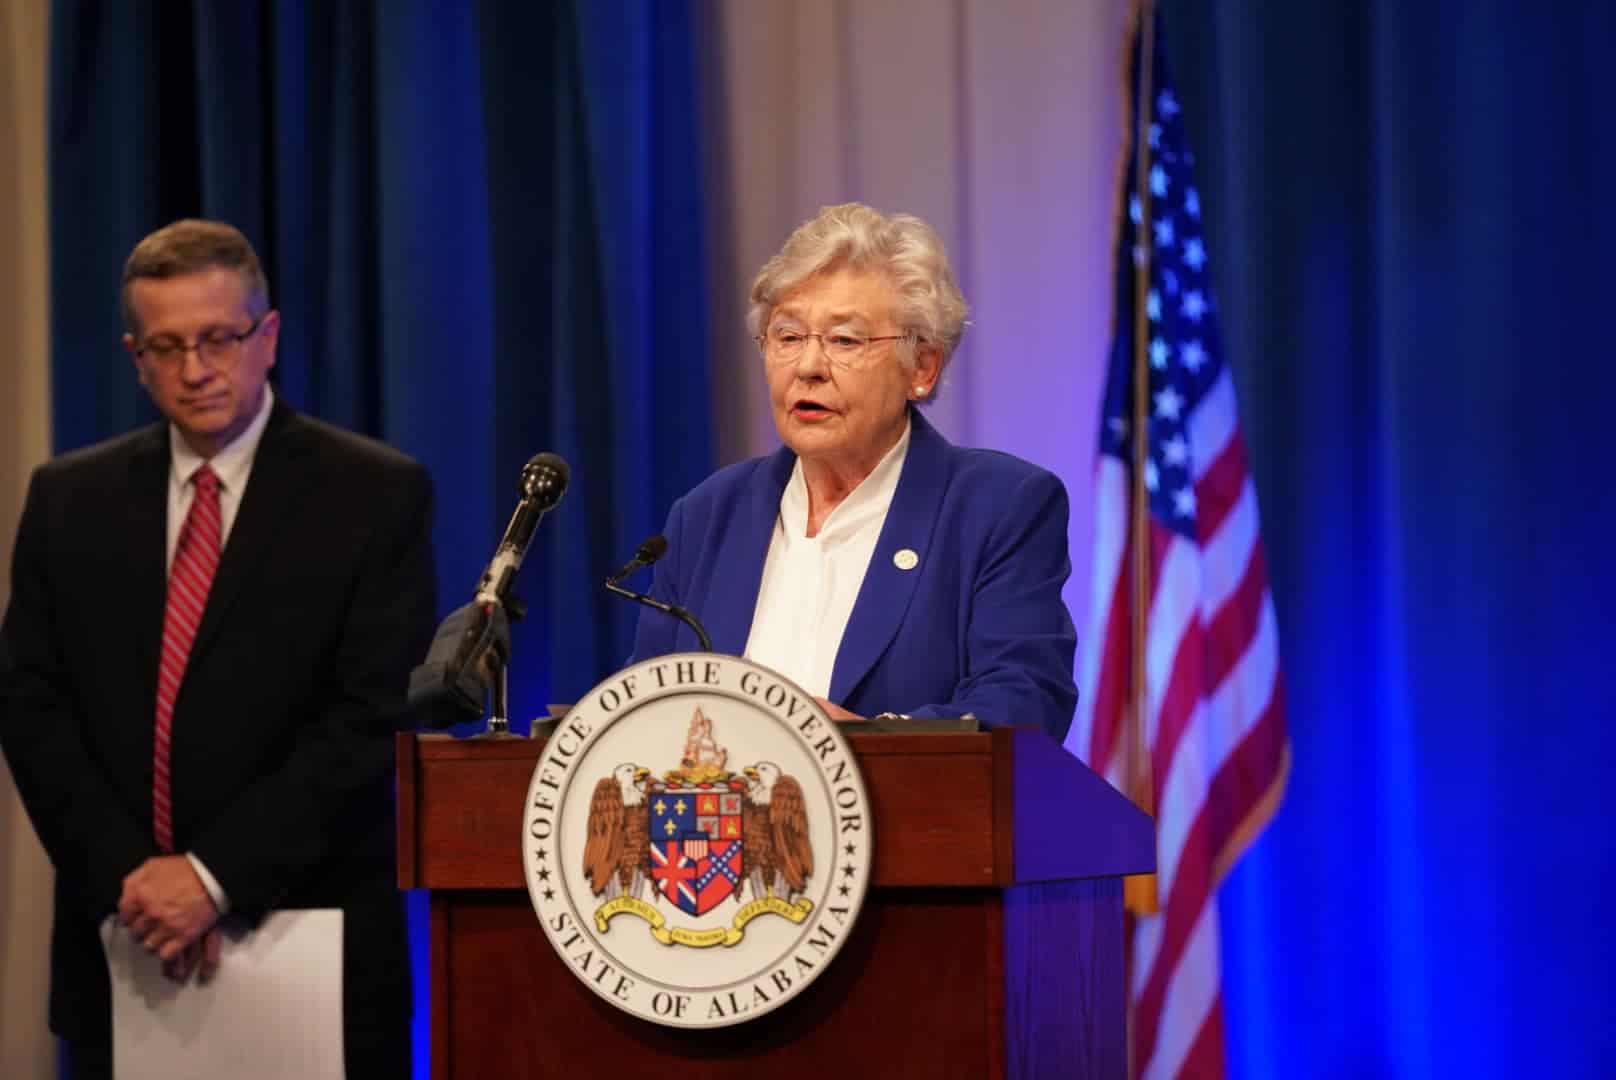 Kay Ivey $100 million "Revive Alabama" grant fund announced for small businesses